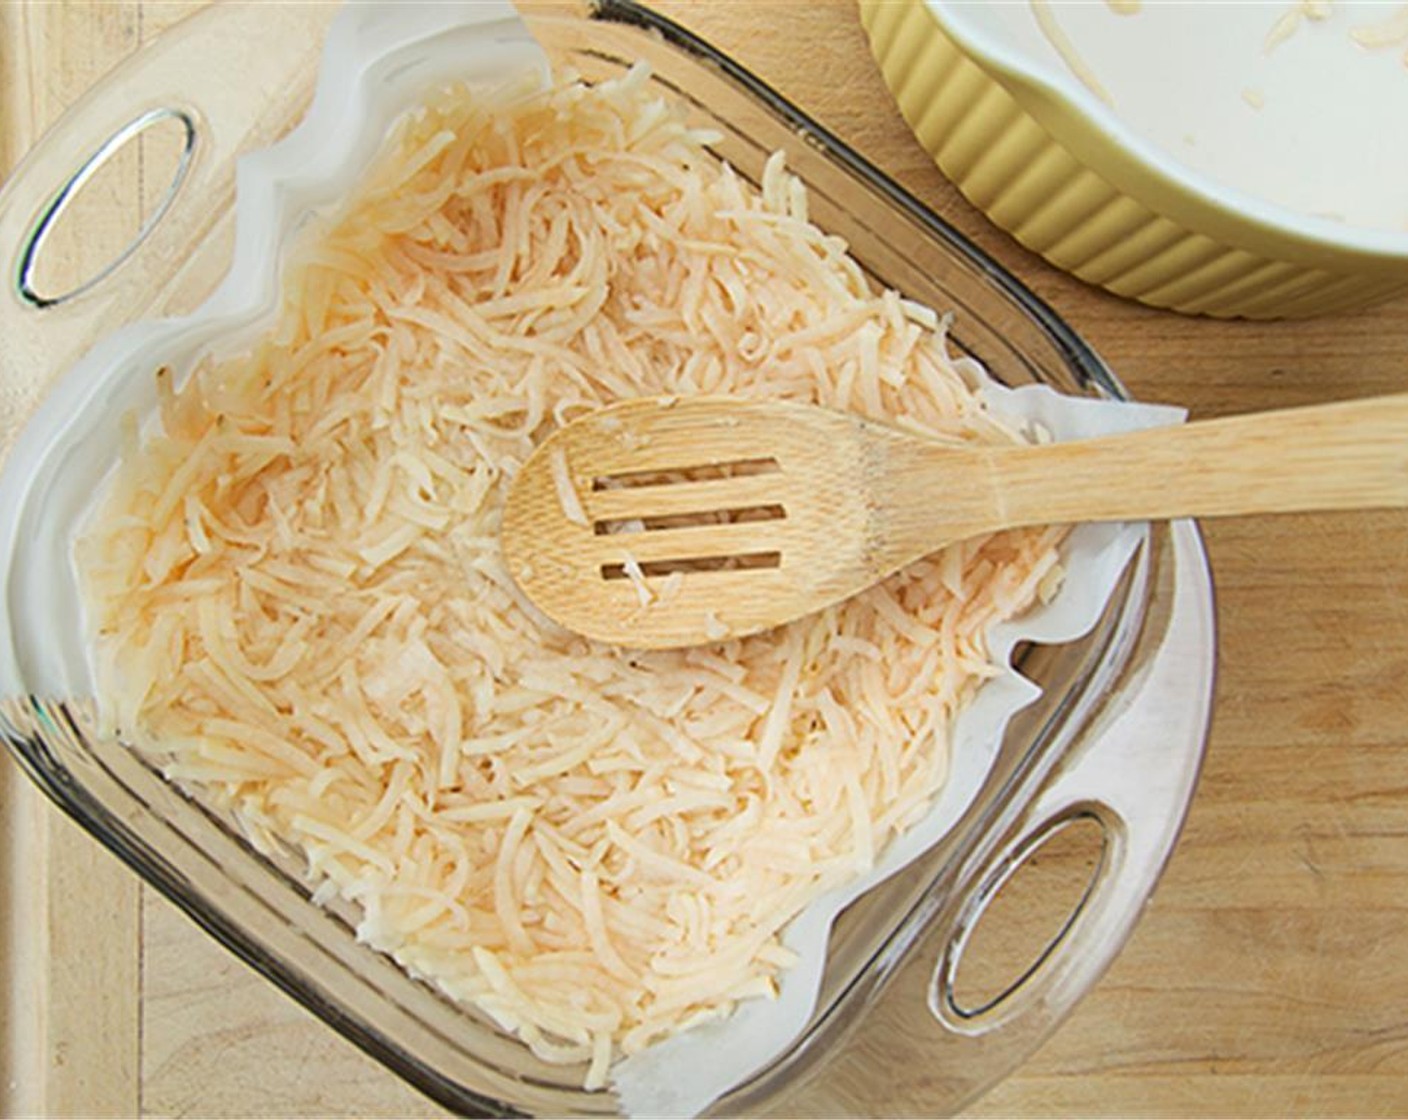 step 2 Combine grated raw Potatoes (2 cups), Onion (1/4 cup), Salt (1/2 tsp) and Egg (1) in a small bowl and mix well. Transfer to the pie pan and pat into place with fingers with a little flour on them, building up the sides into a handsome edge. Bake for 30 minutes.